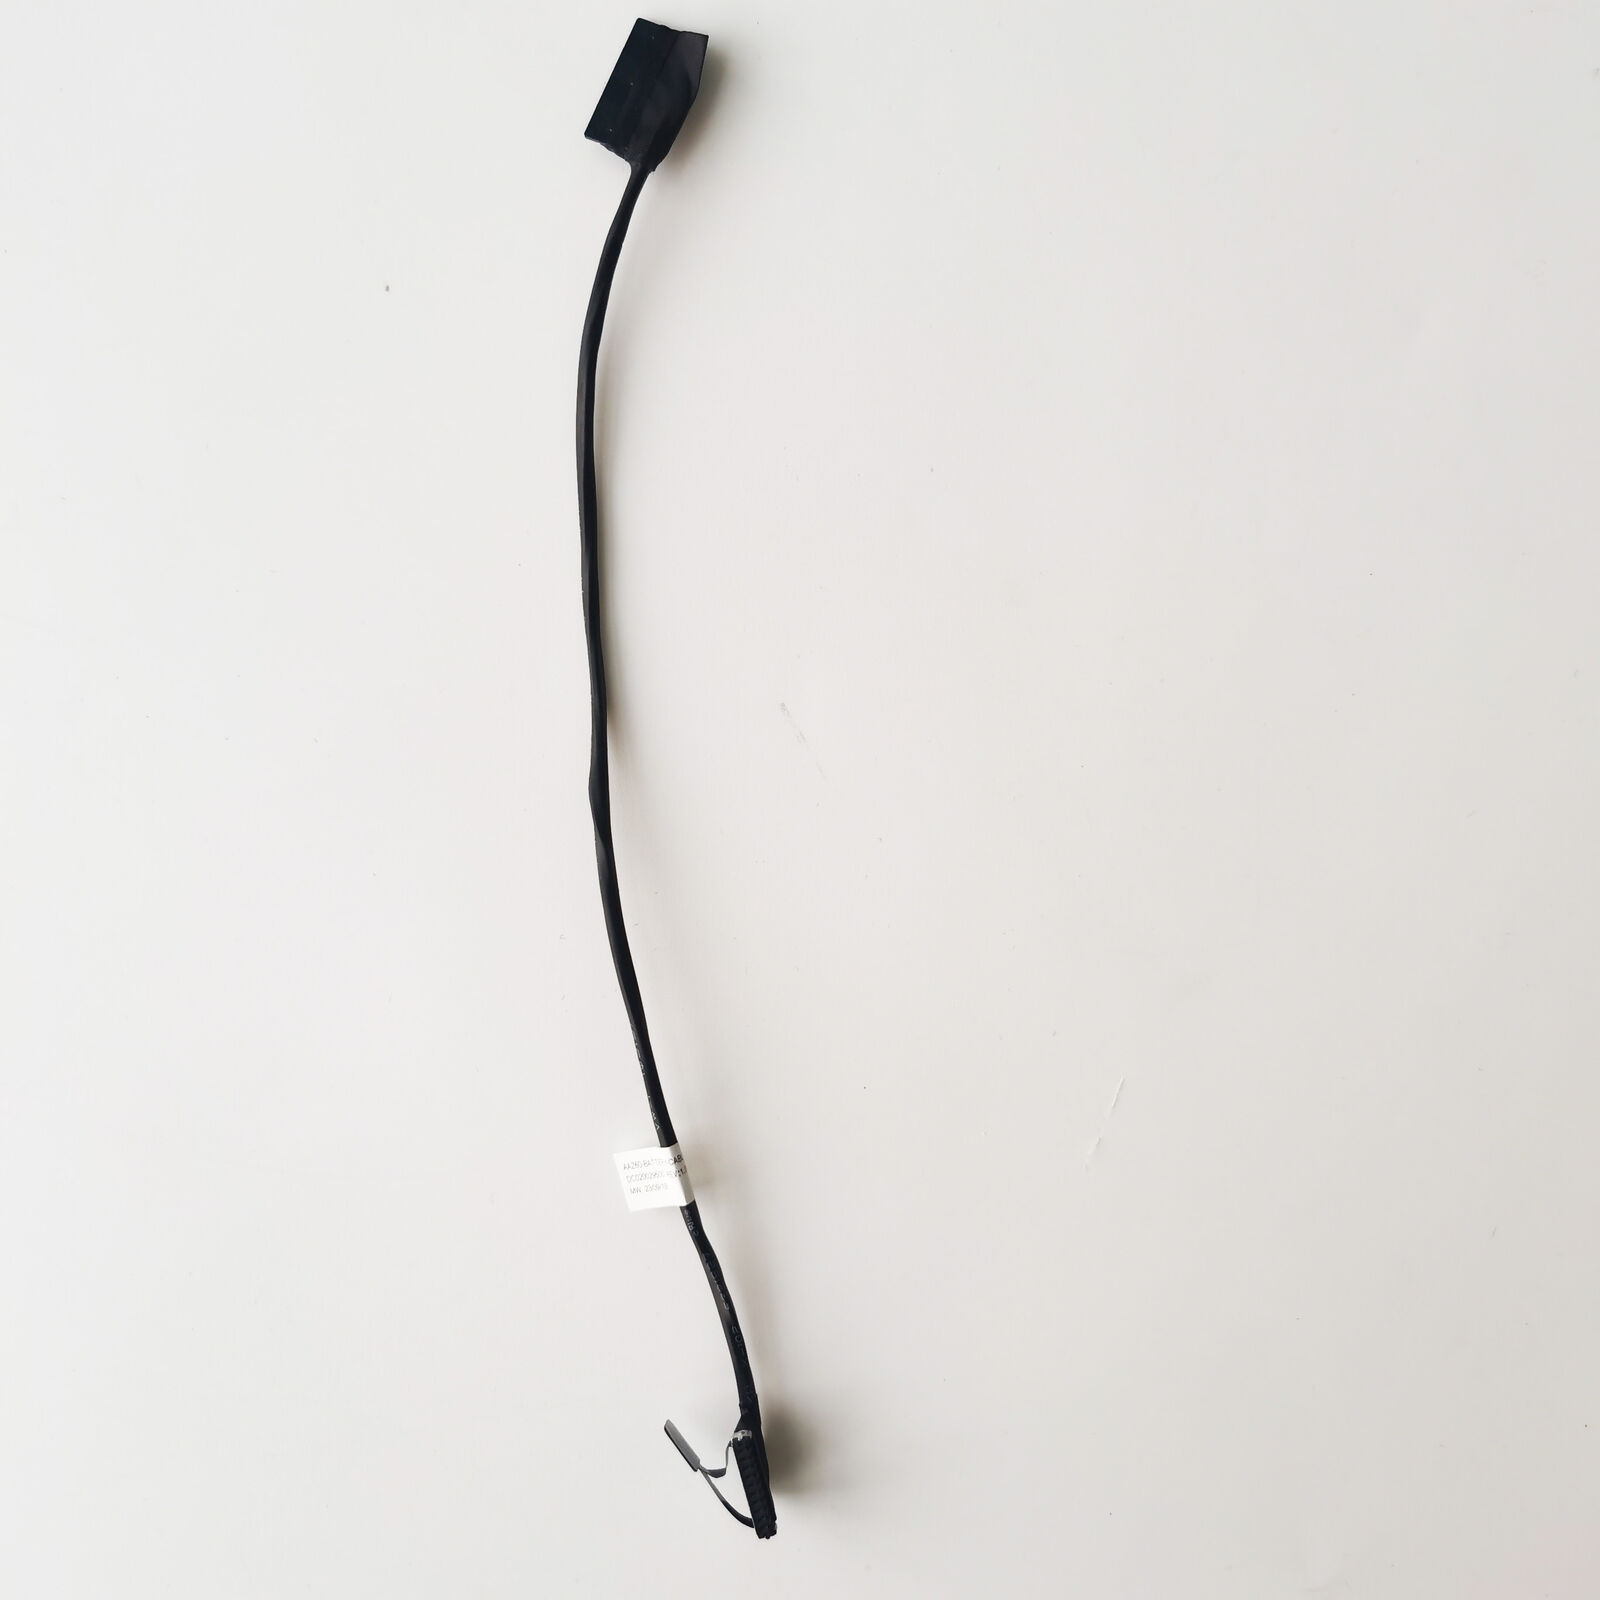 New For Dell Latitude E7270 E7470 Laptop Battery cable connector DC020029500 US